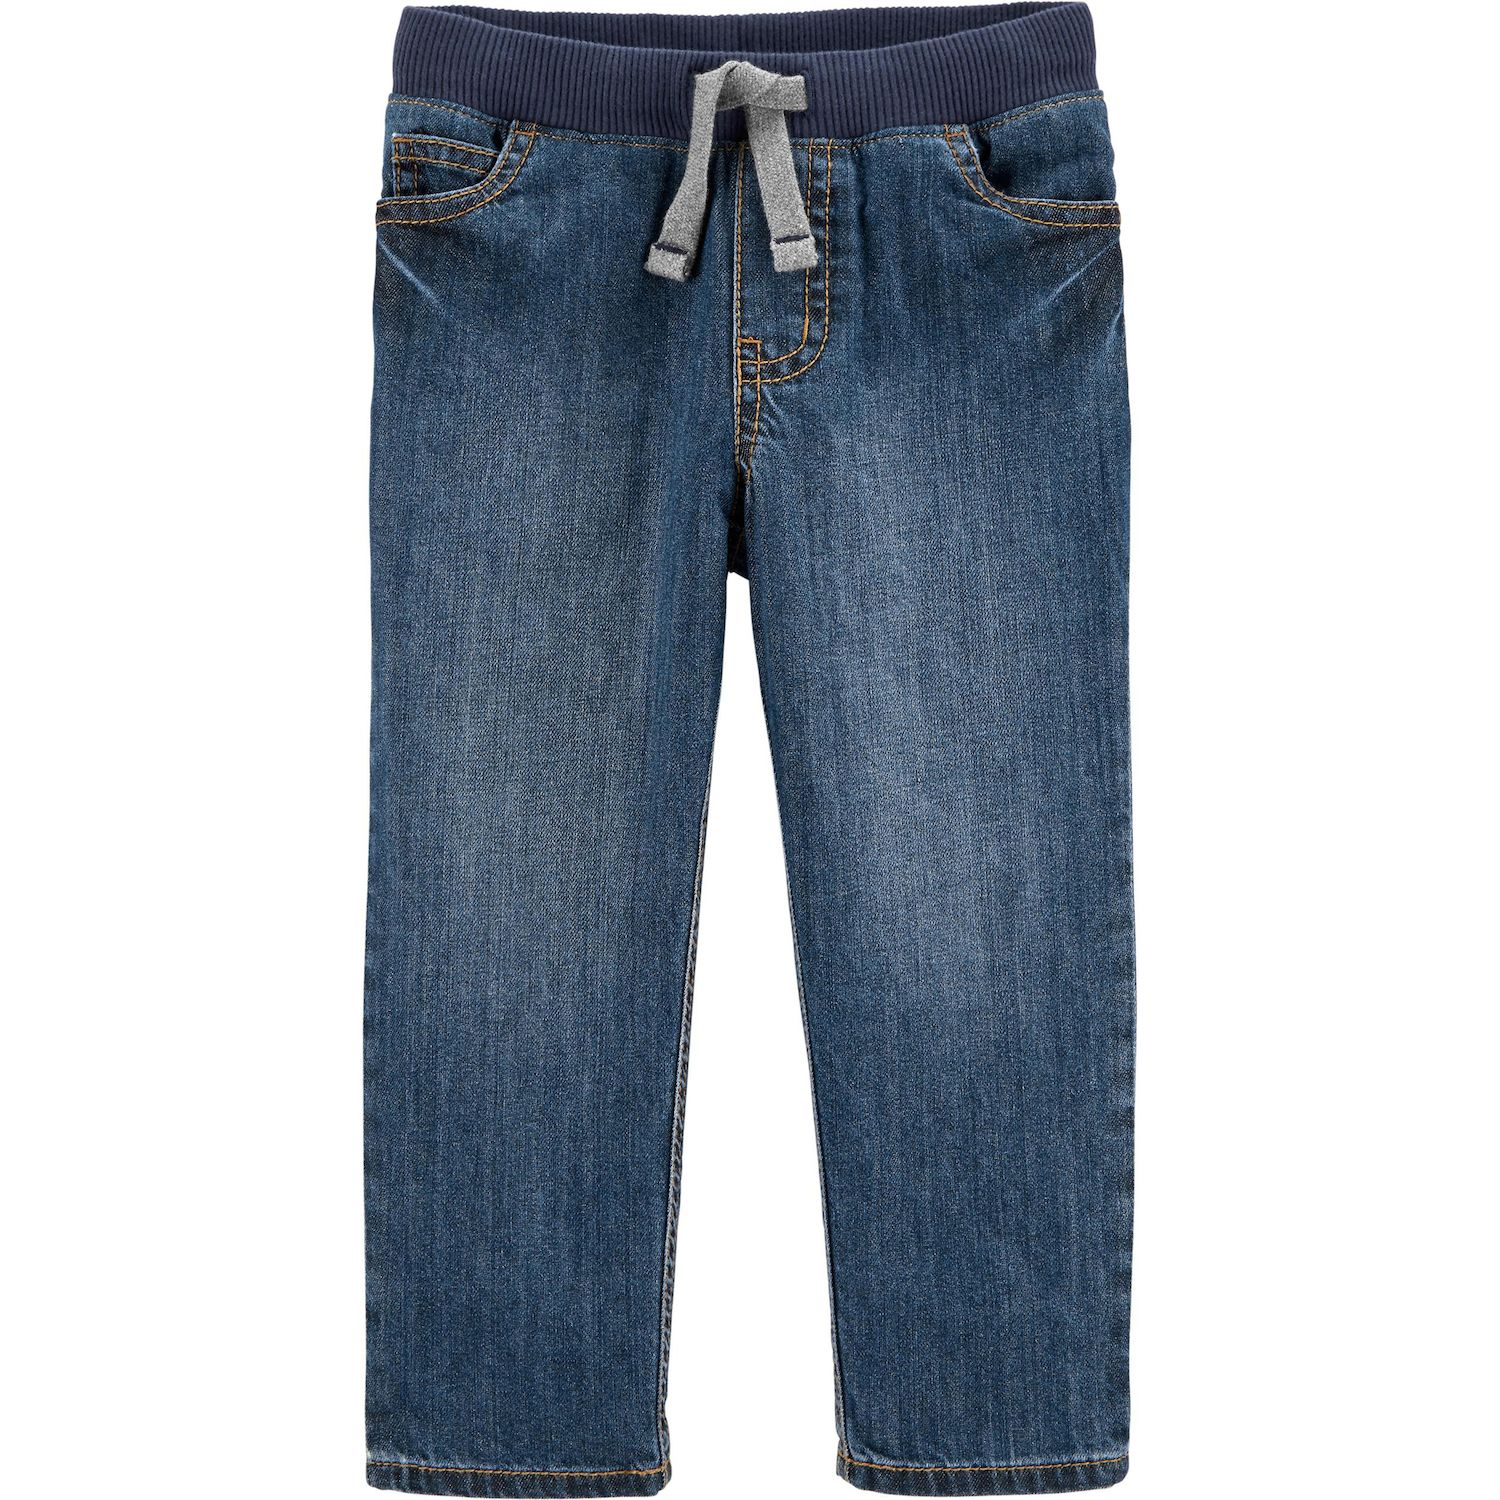 jeans for boys stylish